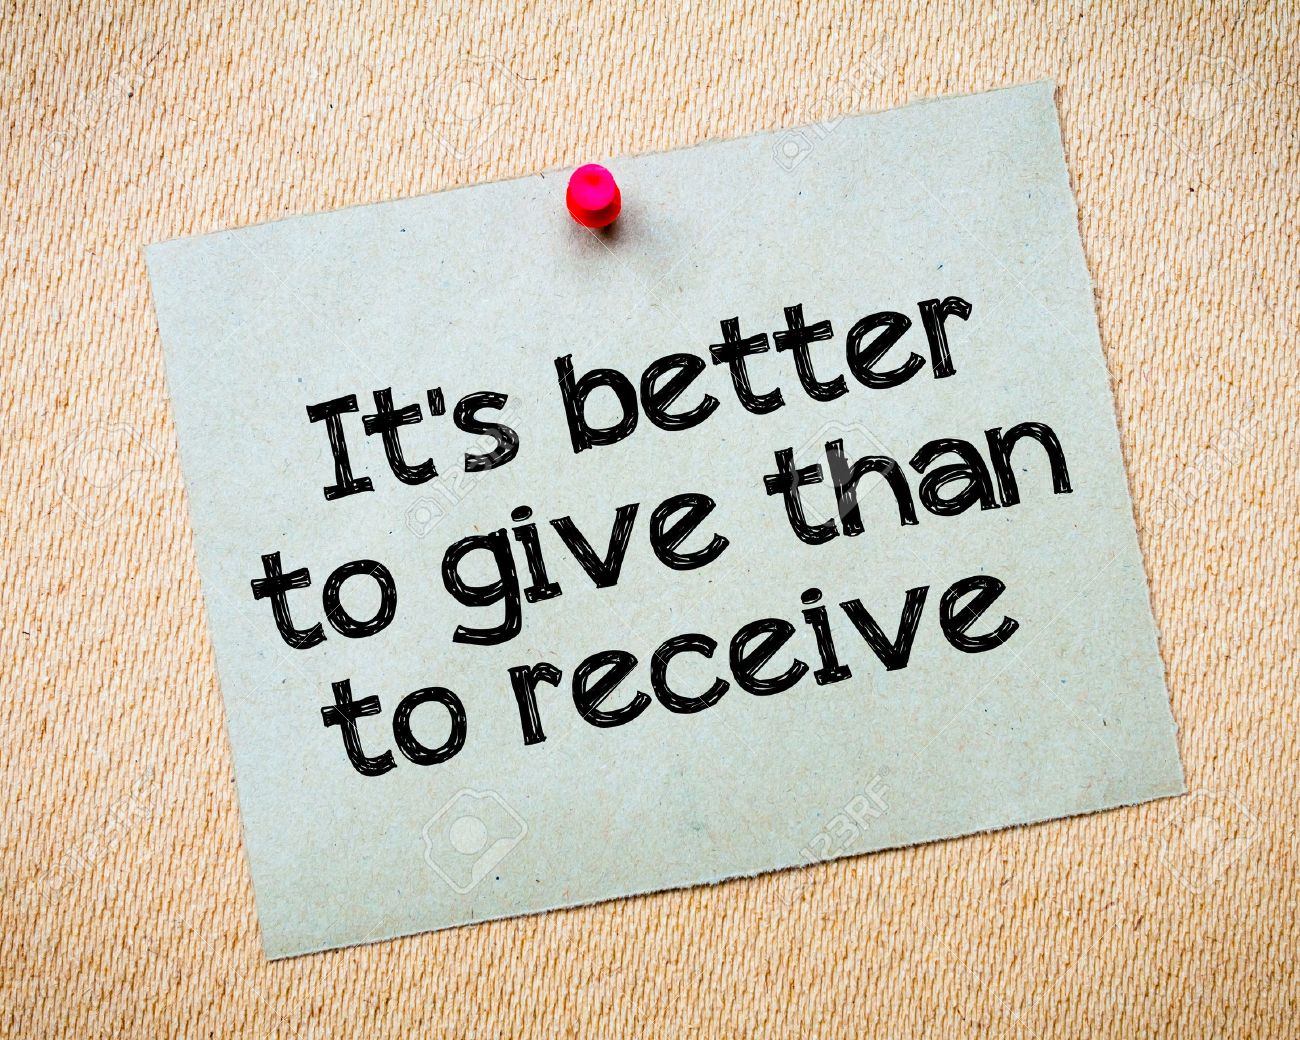 38654969-it-s-better-to-give-than-to-receive-message-recycled-paper-note-pinned-on-cork-board-concept-image.jpg